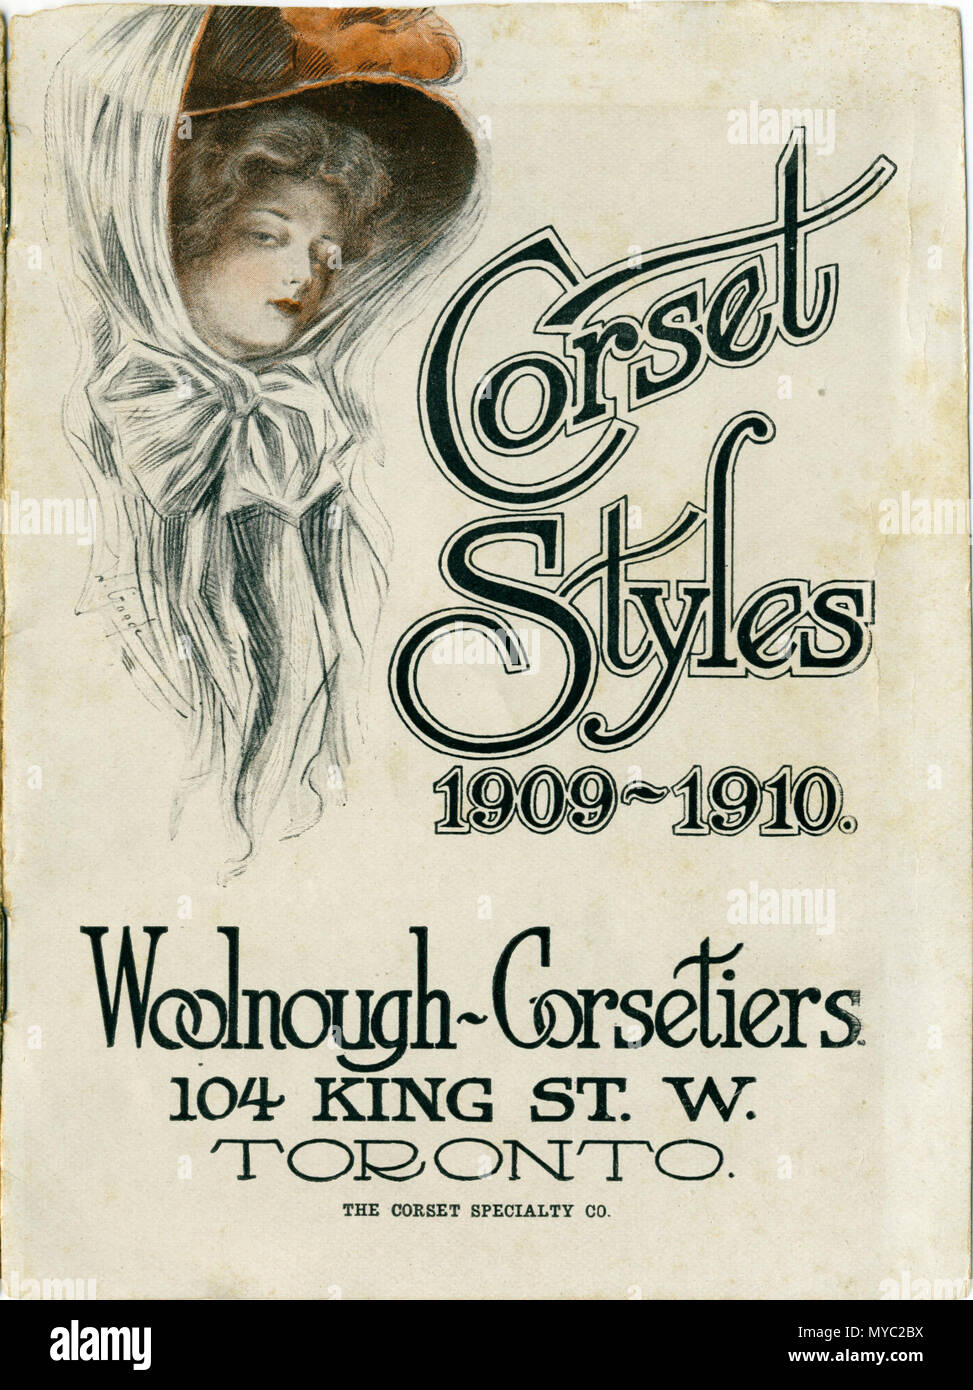 . English: Corset Styles 19091910. WoolnoughCorsetiers. 104 KING ST. W. TORONTO THE CORSET SPECIALTY CO. 1909. Signature W Gande ? Woolnough-Corsetiers 124 CorsetStyles1909-1910 Stock Photo